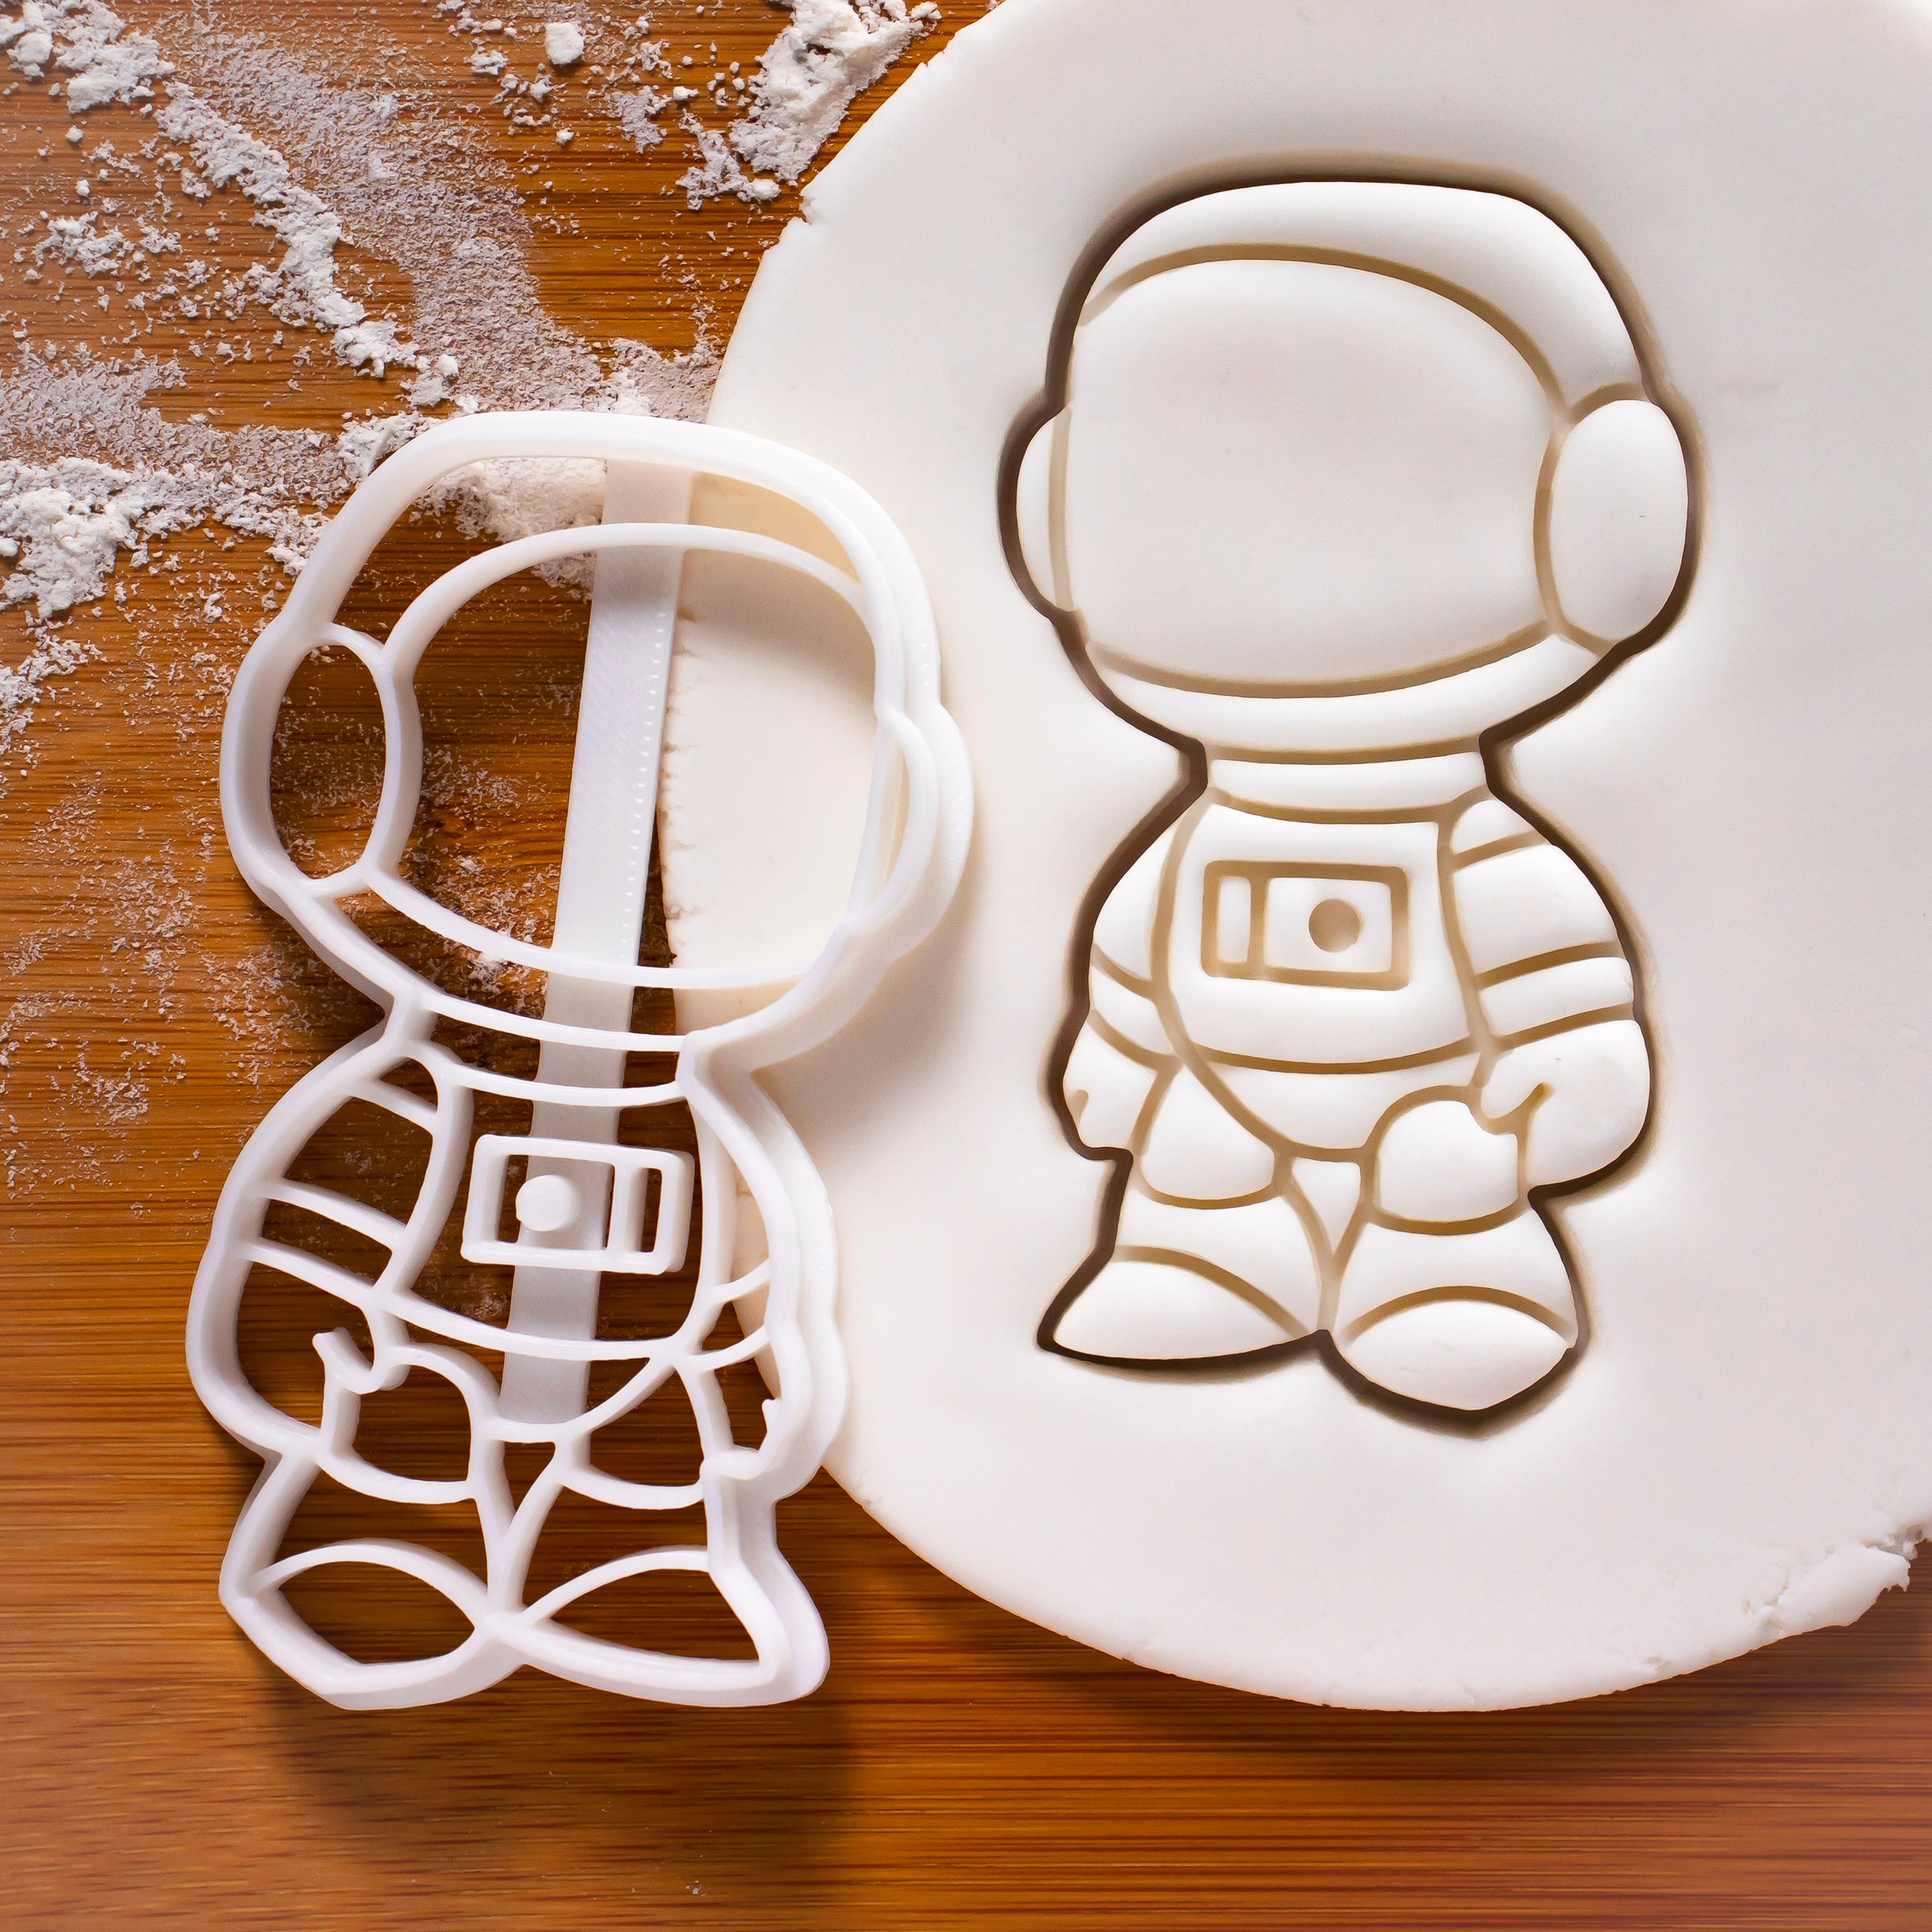 SPACE Astronaut, Planet, Rocket, Space Themed Cookie Cutters. 